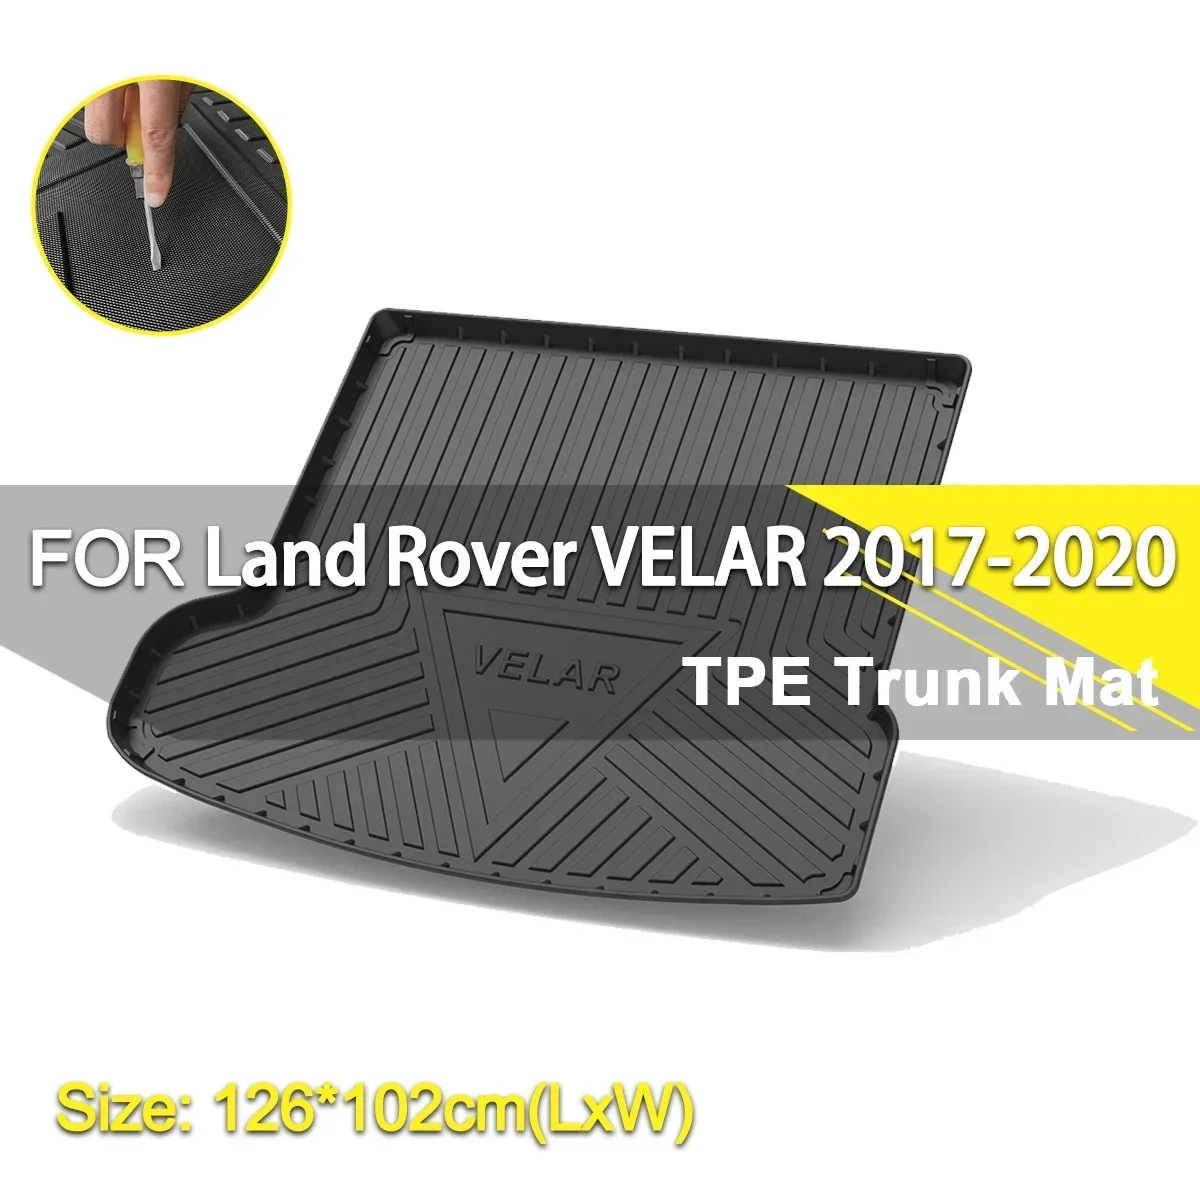 

Car Rear Trunk Cover Mat Waterproof Non-Slip Rubber TPE Cargo Liner Accessories For Land Rover VELAR 2017-2020